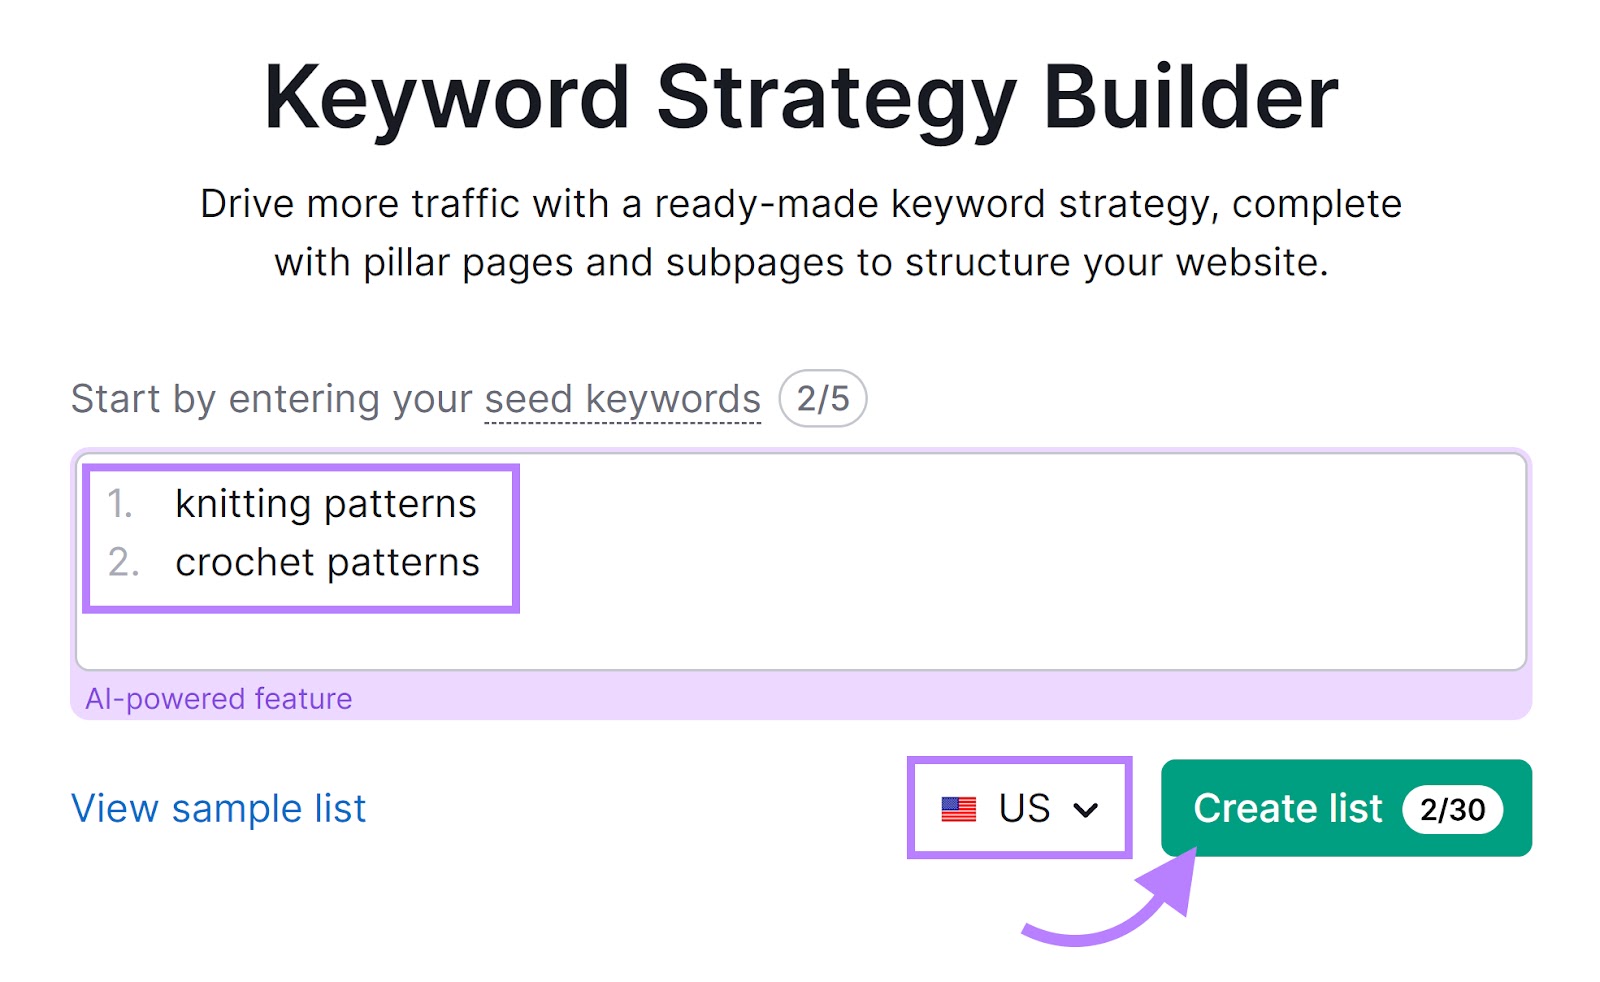 Keyword Strategy Builder tool with "knitting patterns", "crochet patterns", and "Create list" button highlighted.